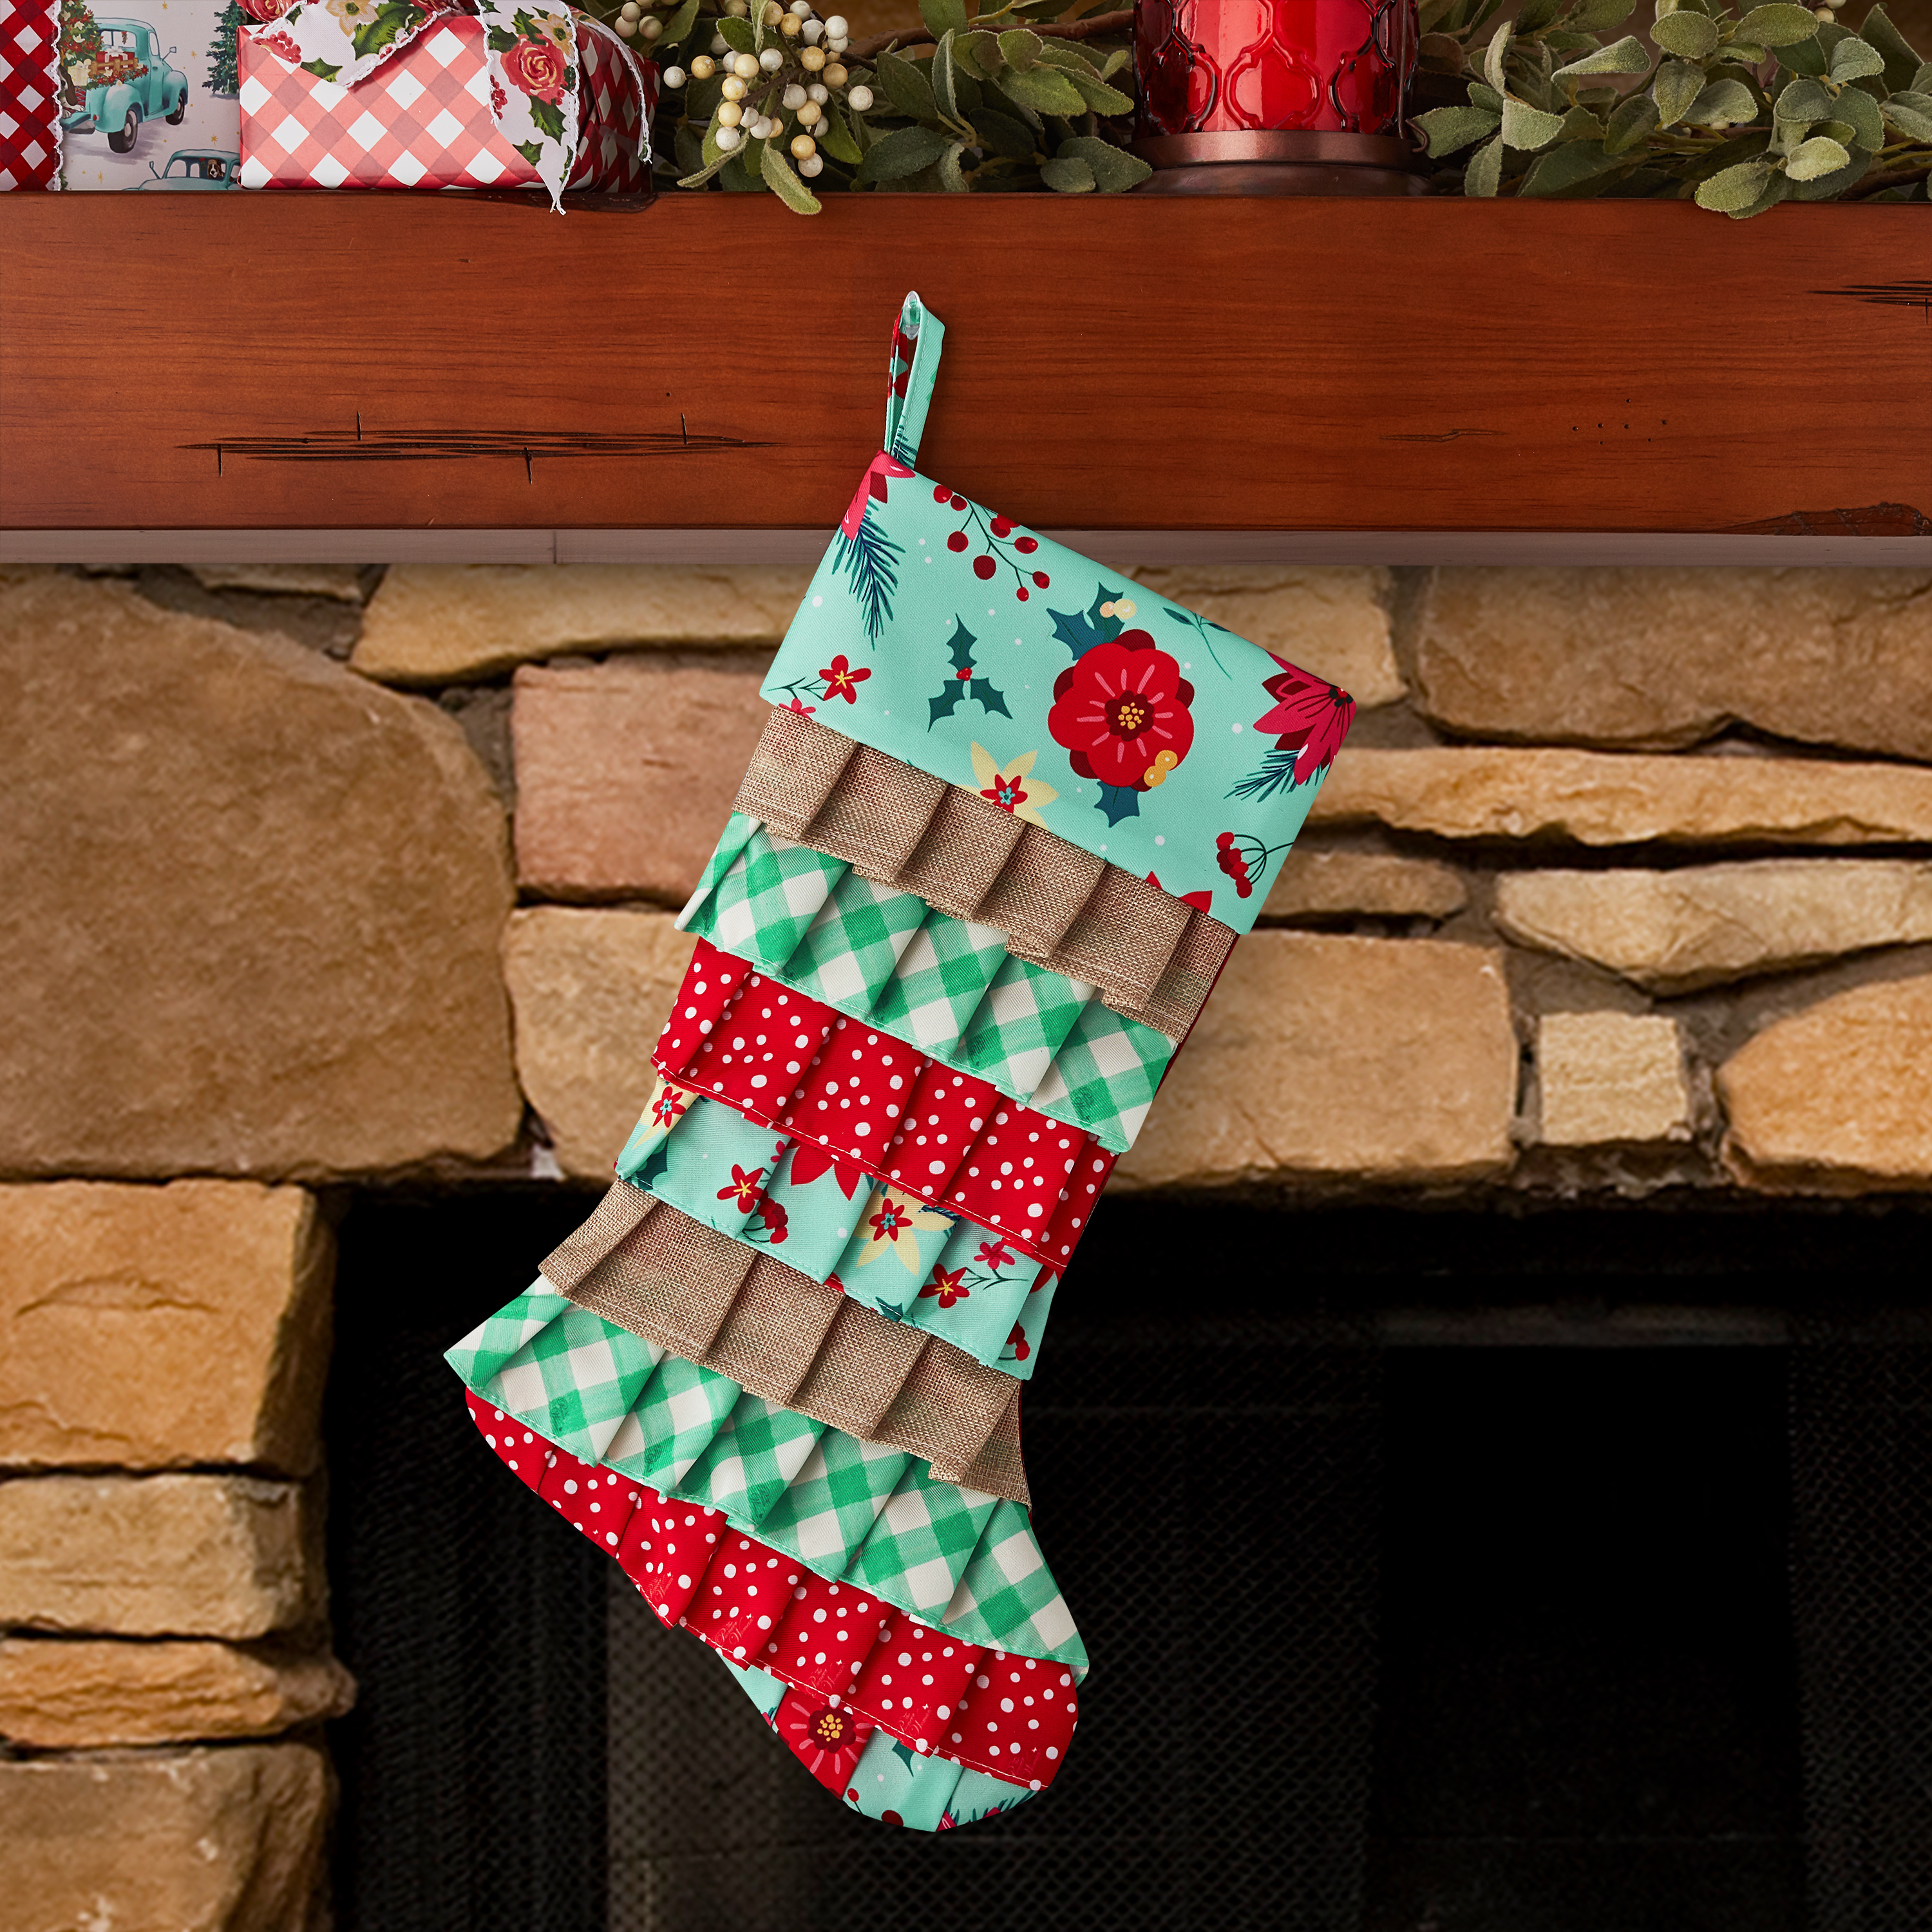 The Pioneer Woman Floral Ruffle Multi-color Christmas Stocking, 20" - image 2 of 5